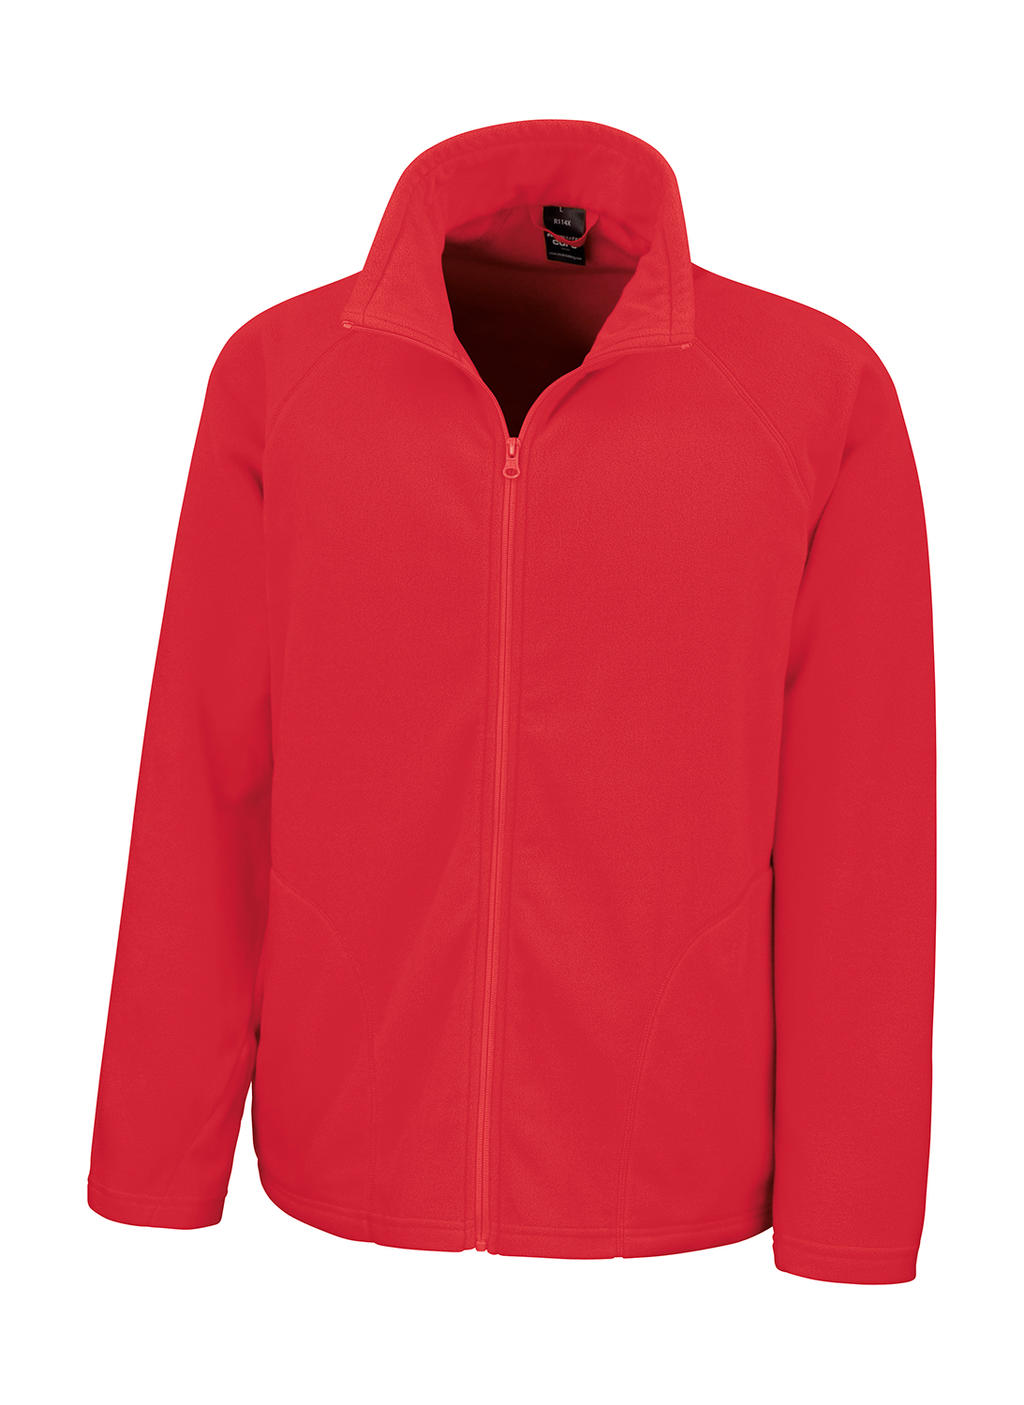  Microfleece Jacket in Farbe Red